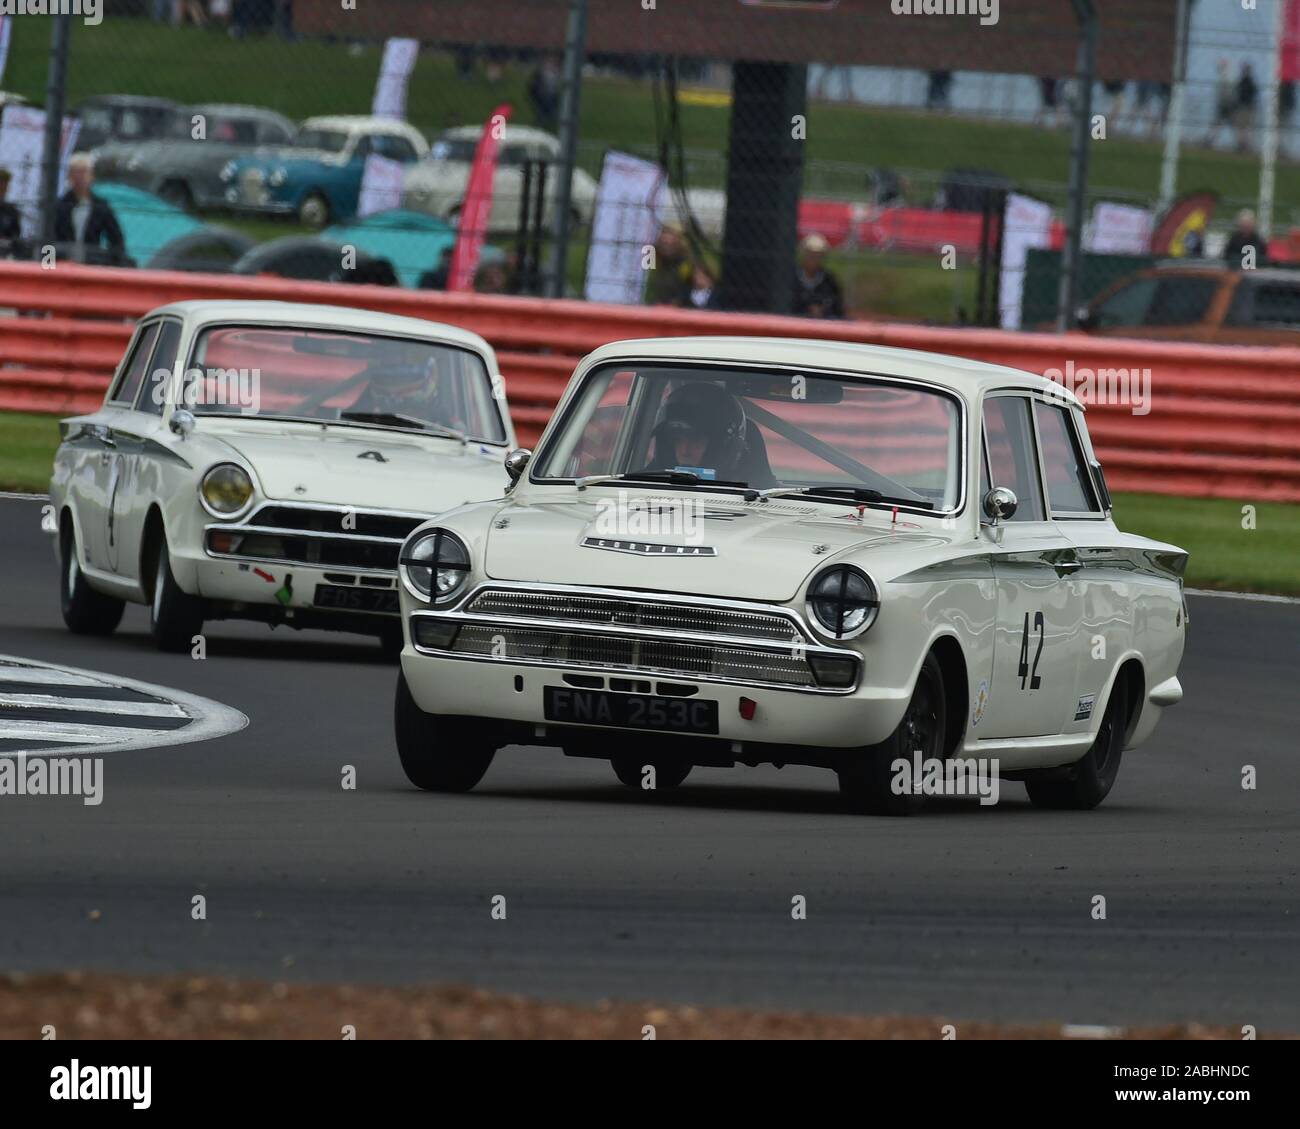 John Spiers, Ford Lotus Cortina, Transatlantic Trophy for Pre '66 Touring Cars, Silverstone Classic, July 2019, Silverstone, Northamptonshire, England Stock Photo